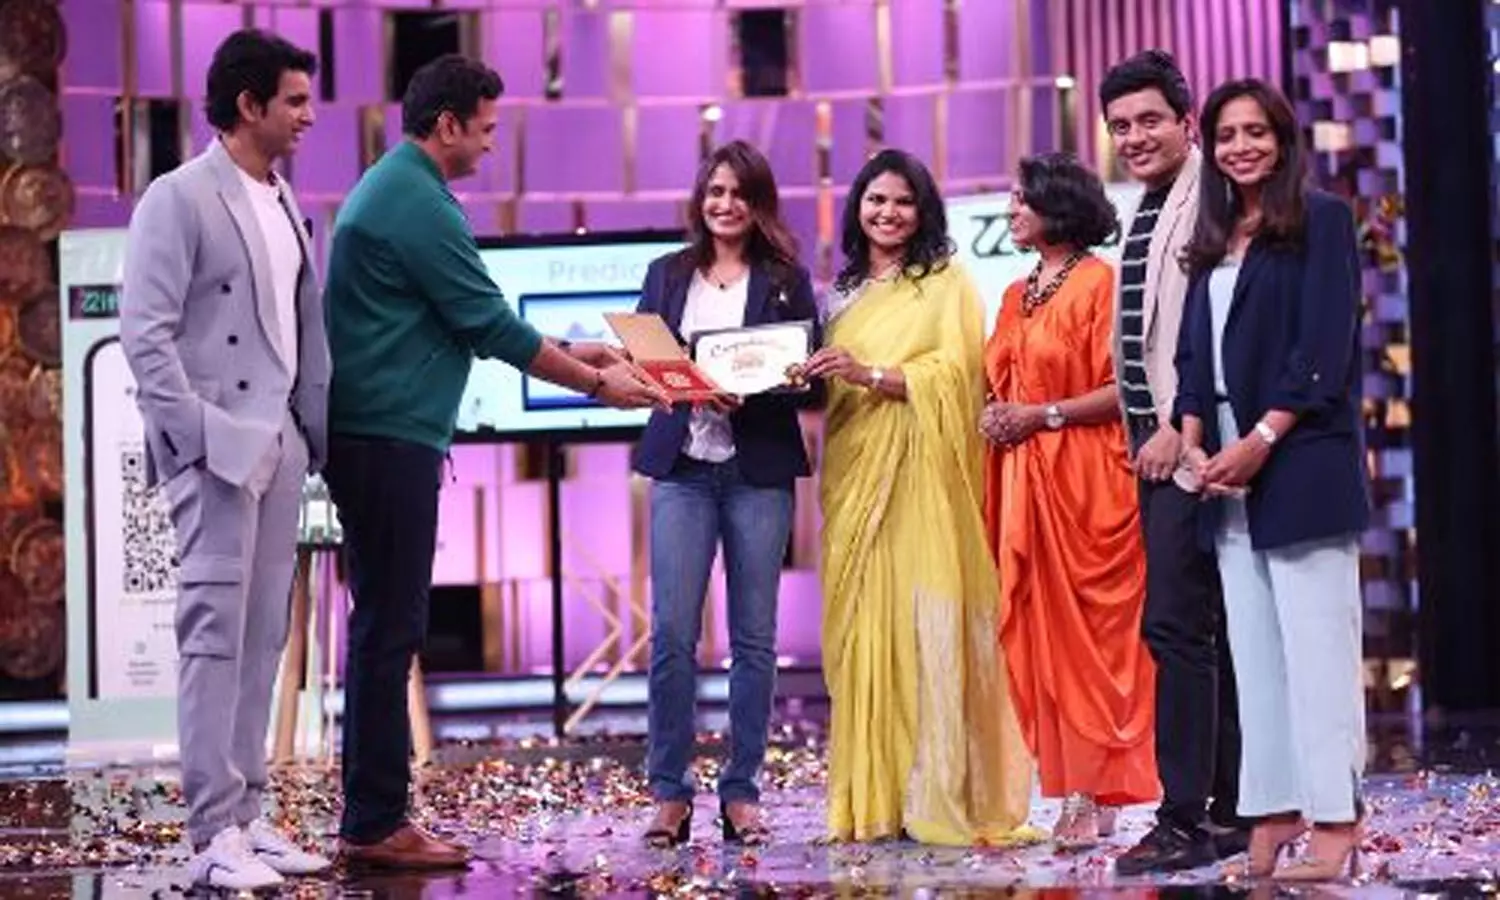 Hyderabad-based UPI loyalty company Zithara secures Rs 60 lakh deal on Nenu Super Woman show